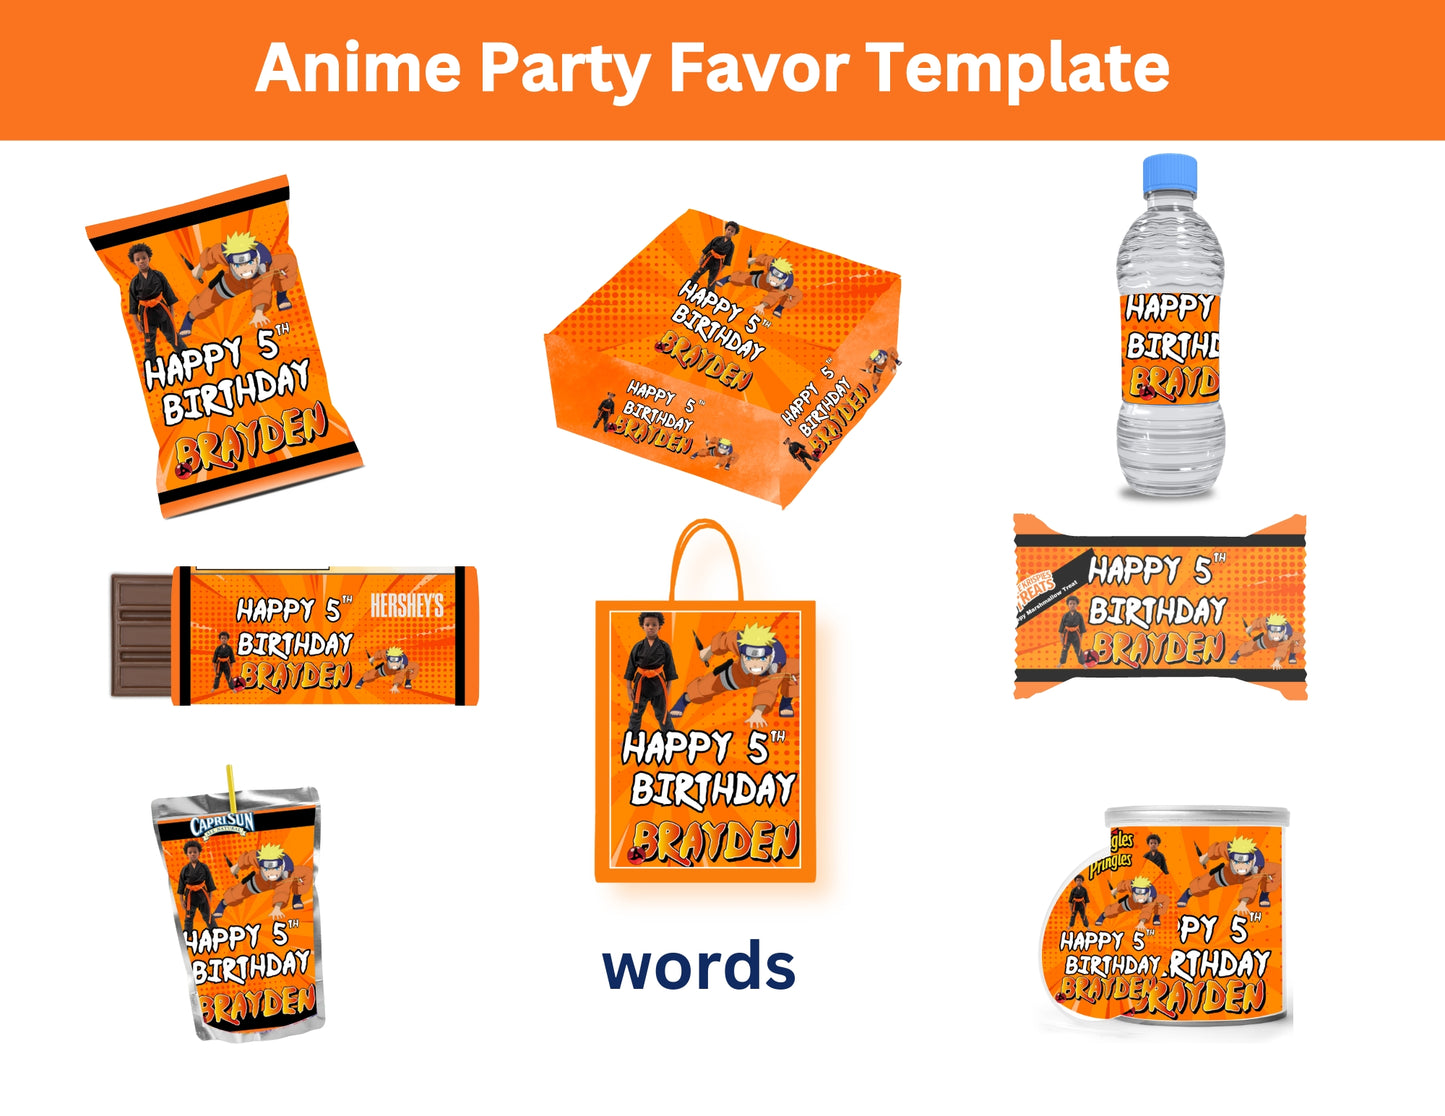 Anime Party Favor Template